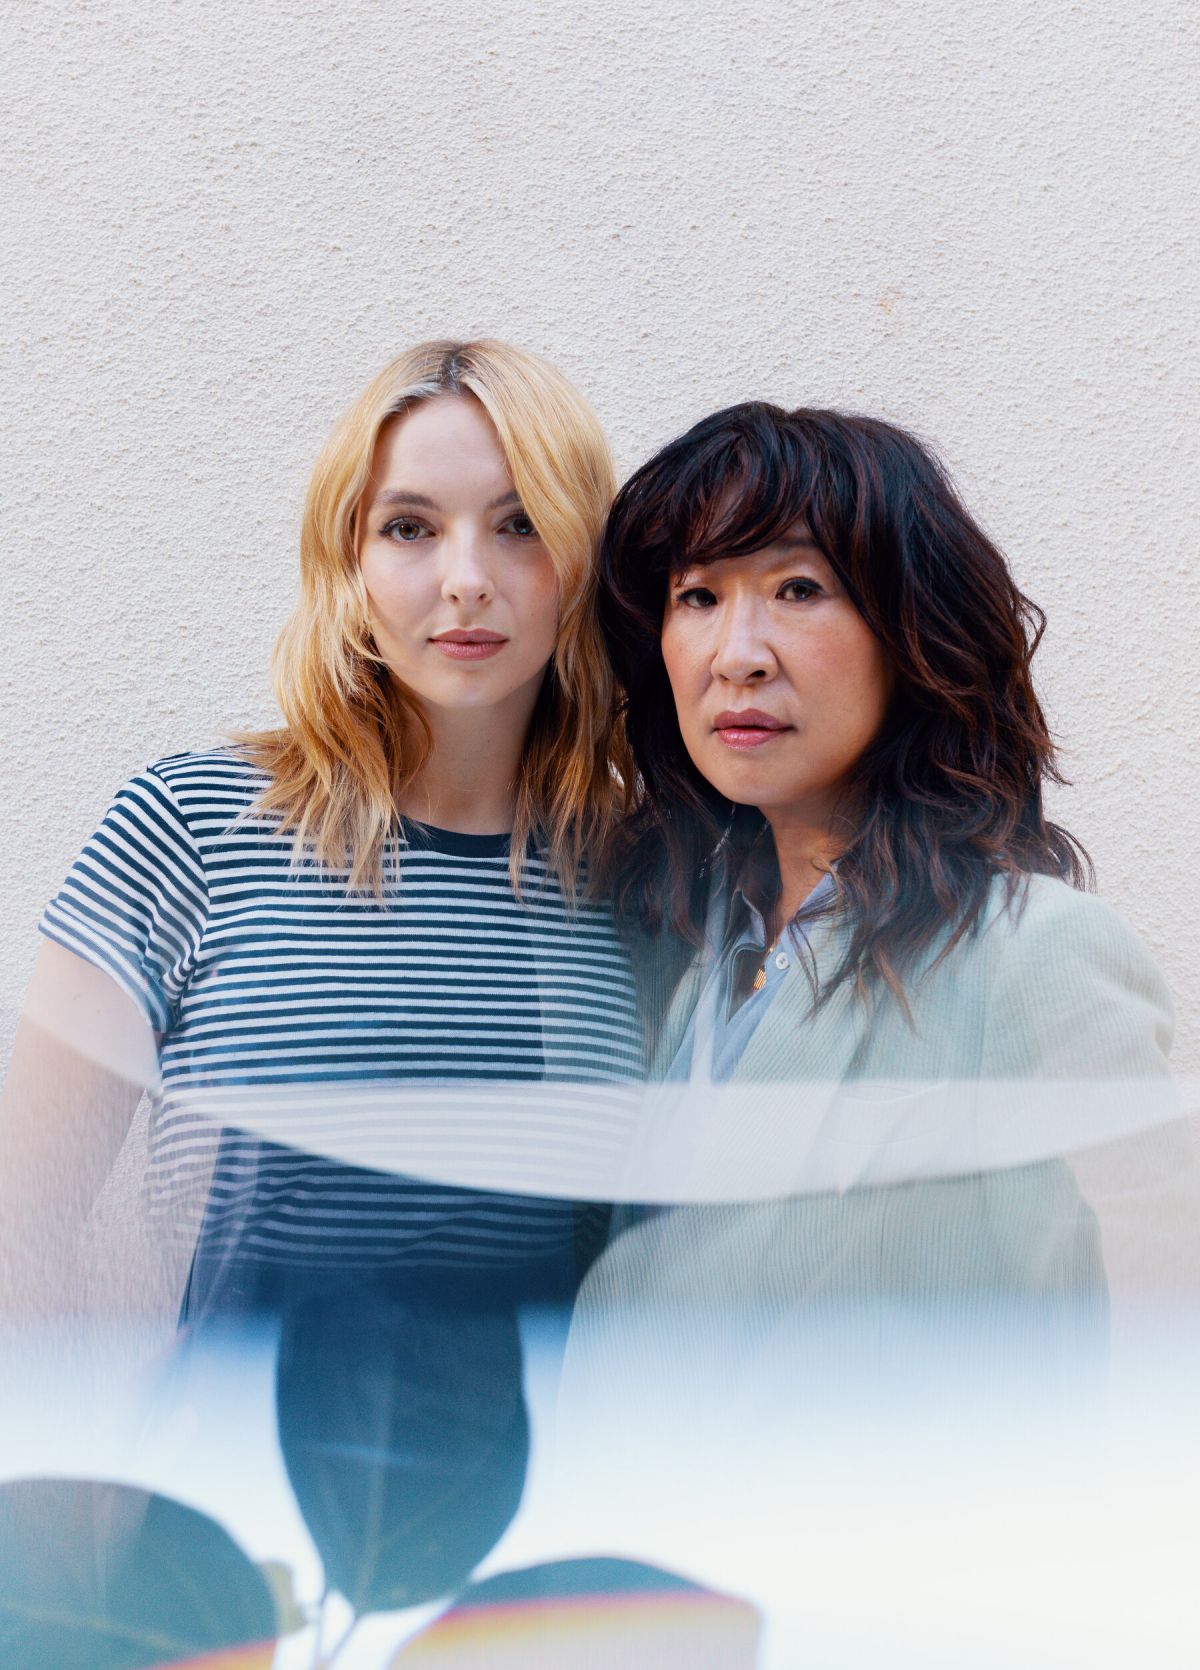 jodie-comer-and-sandra-oh-for-new-york-times-magazine-february-2022-3.jpg